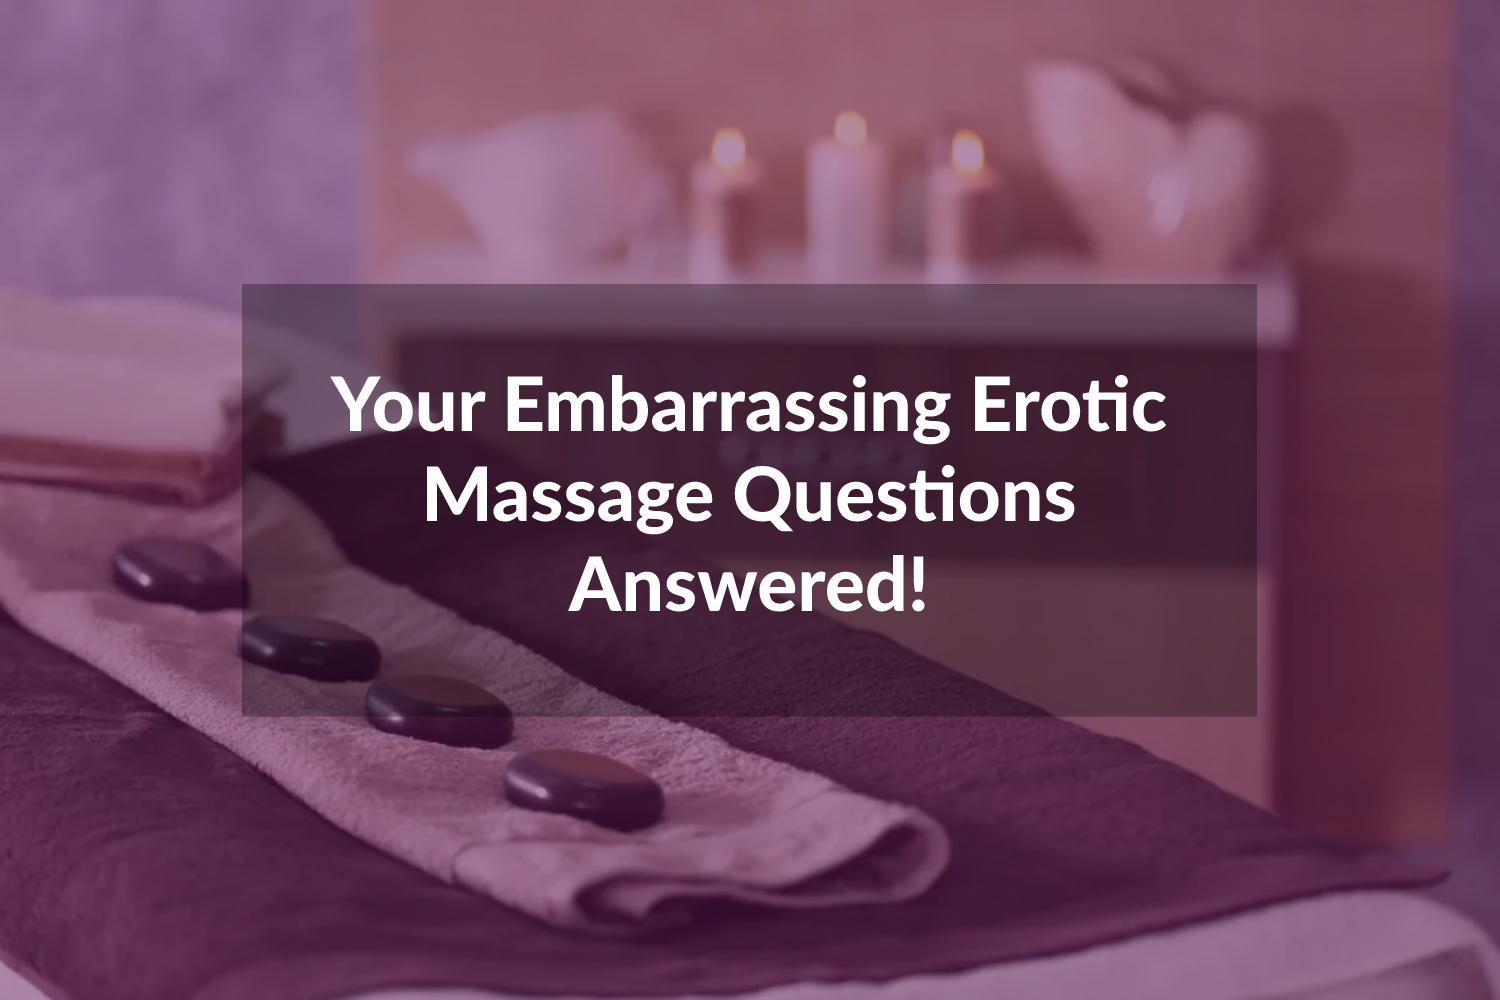 Your Embarrassing Massage Questions Answered